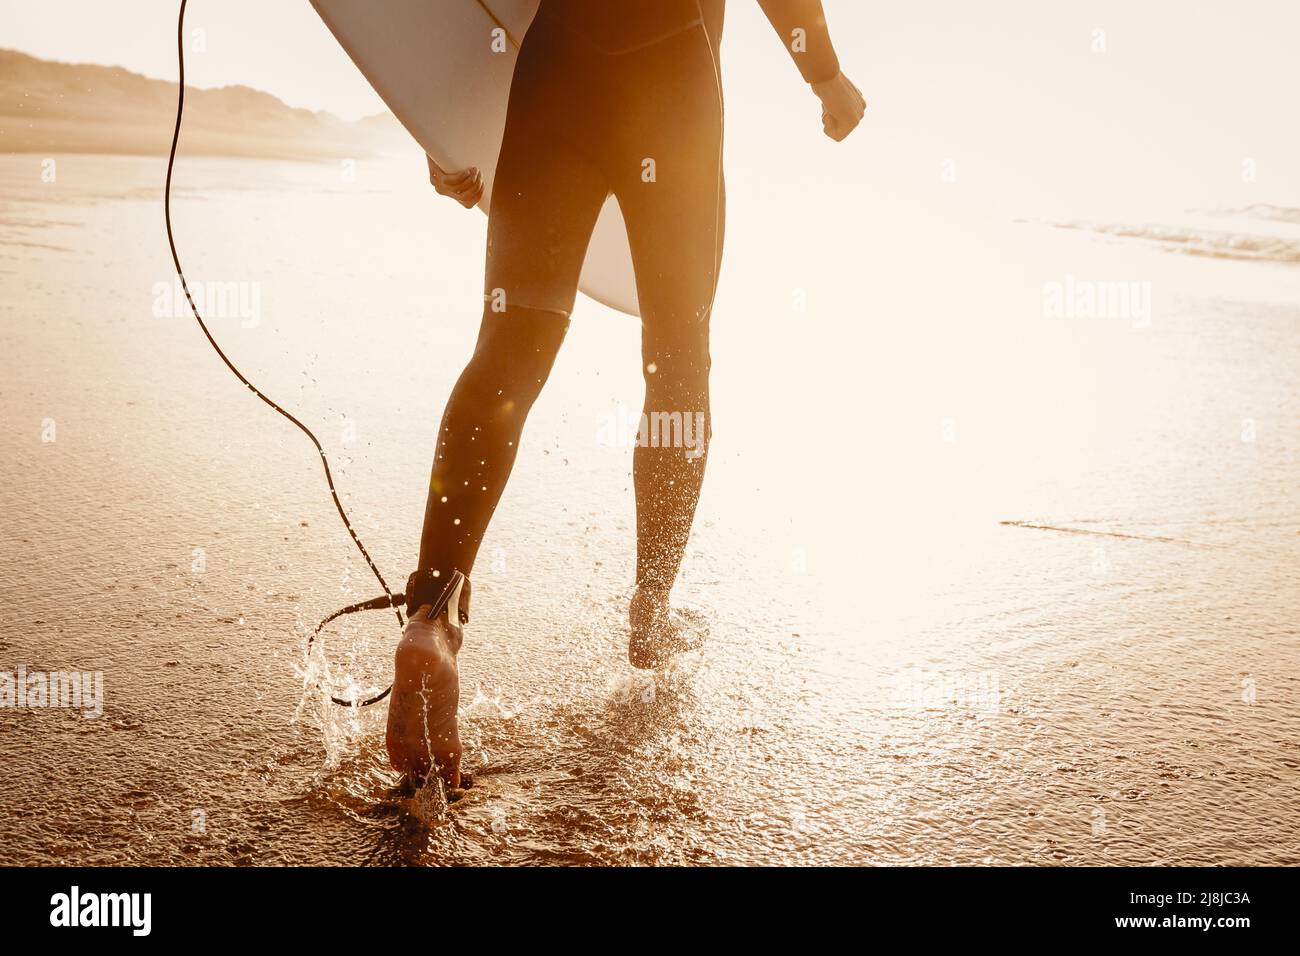 A surfer with his surfboard running to the waves Stock Photo